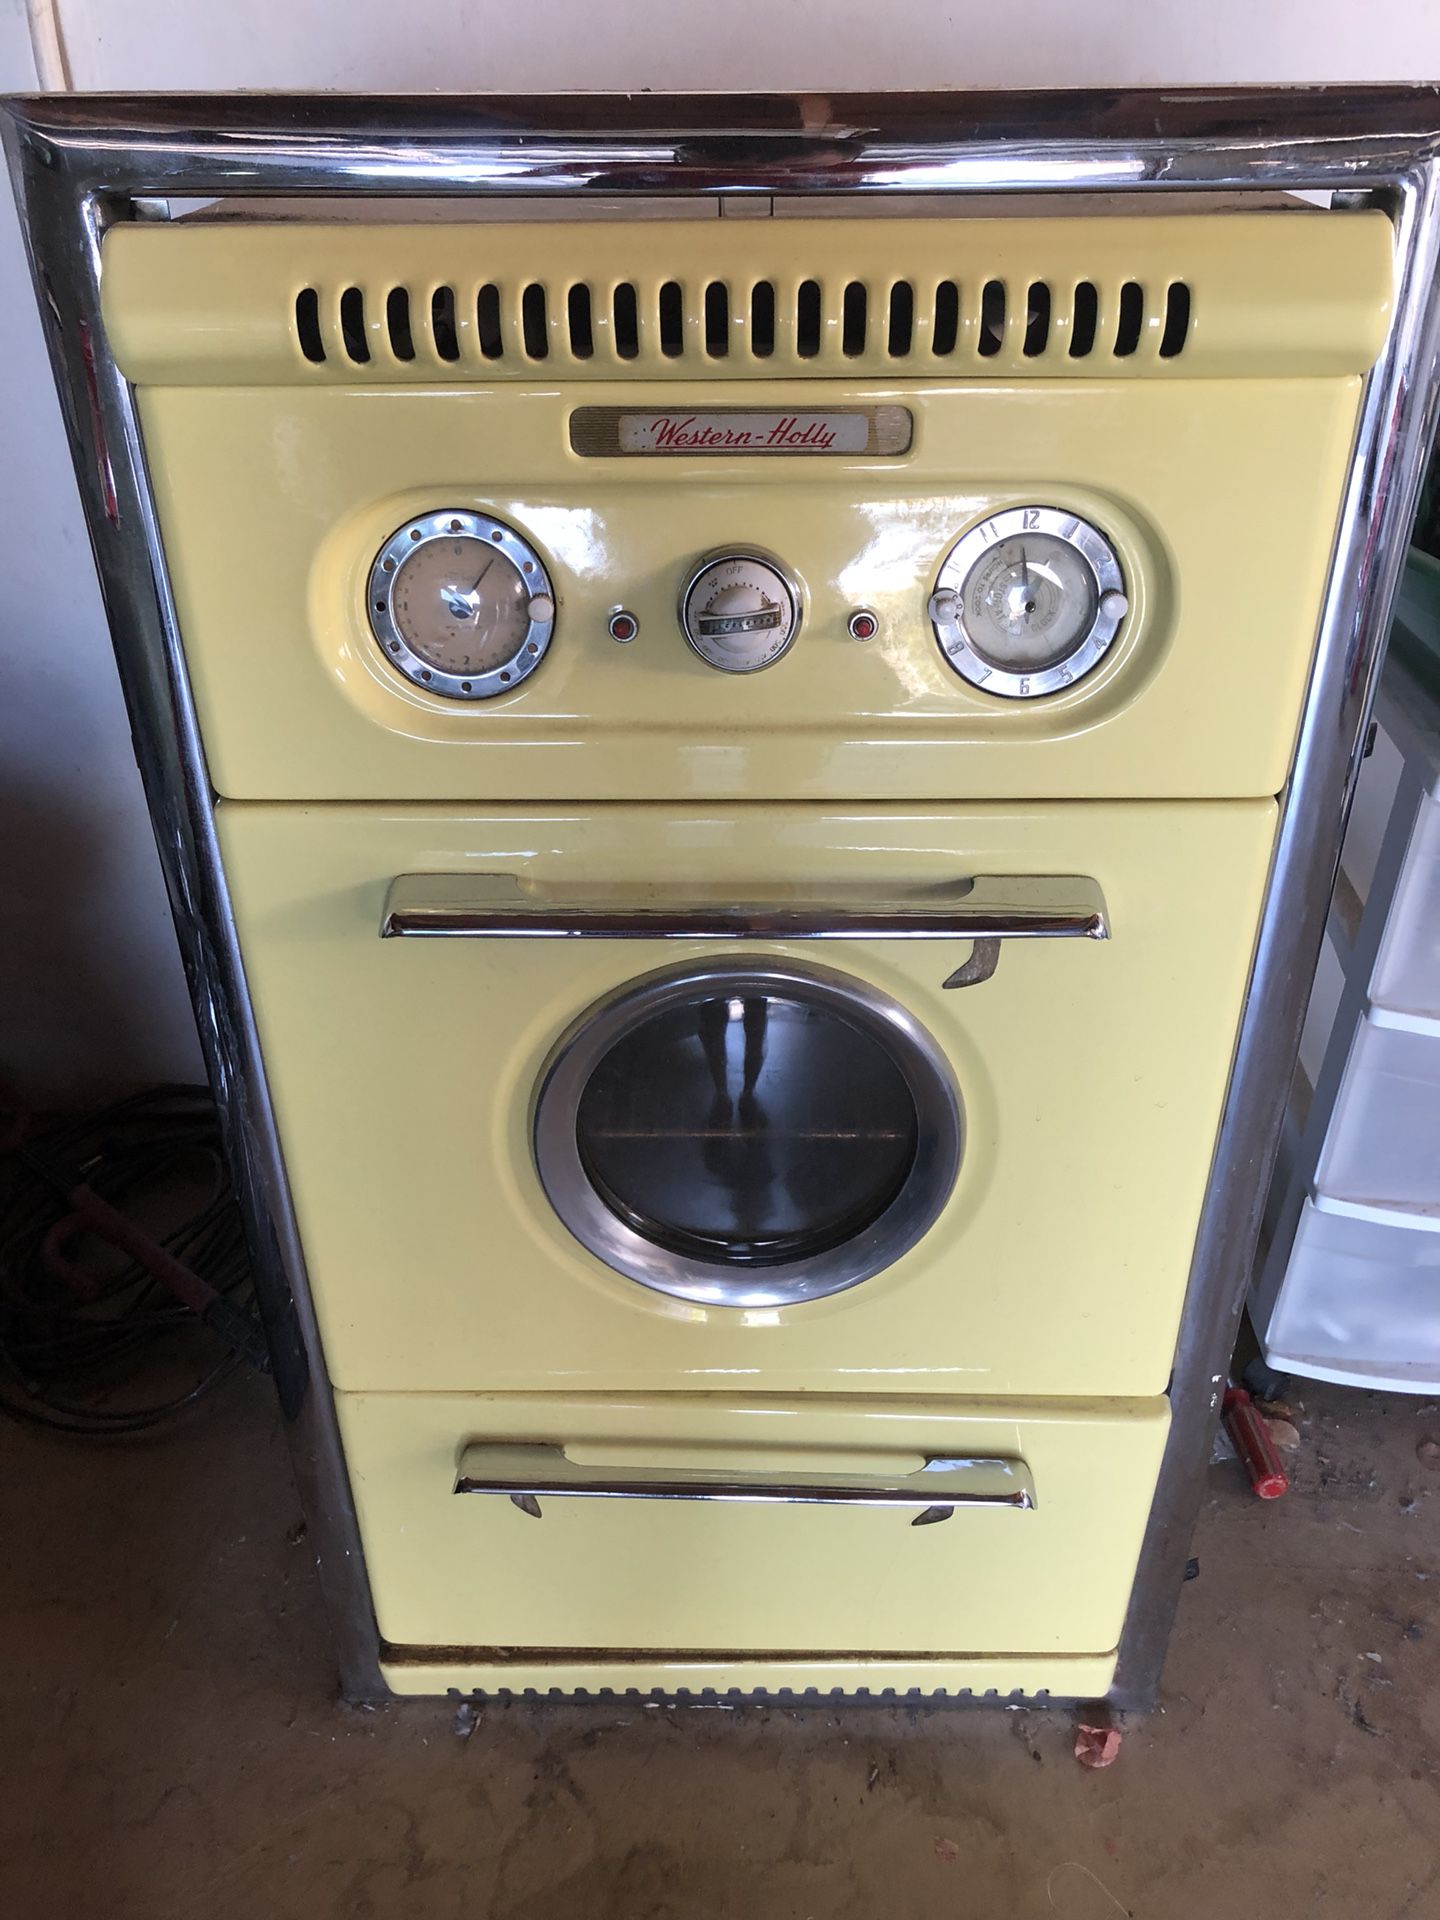 1950’s Western Holly wall oven stove.